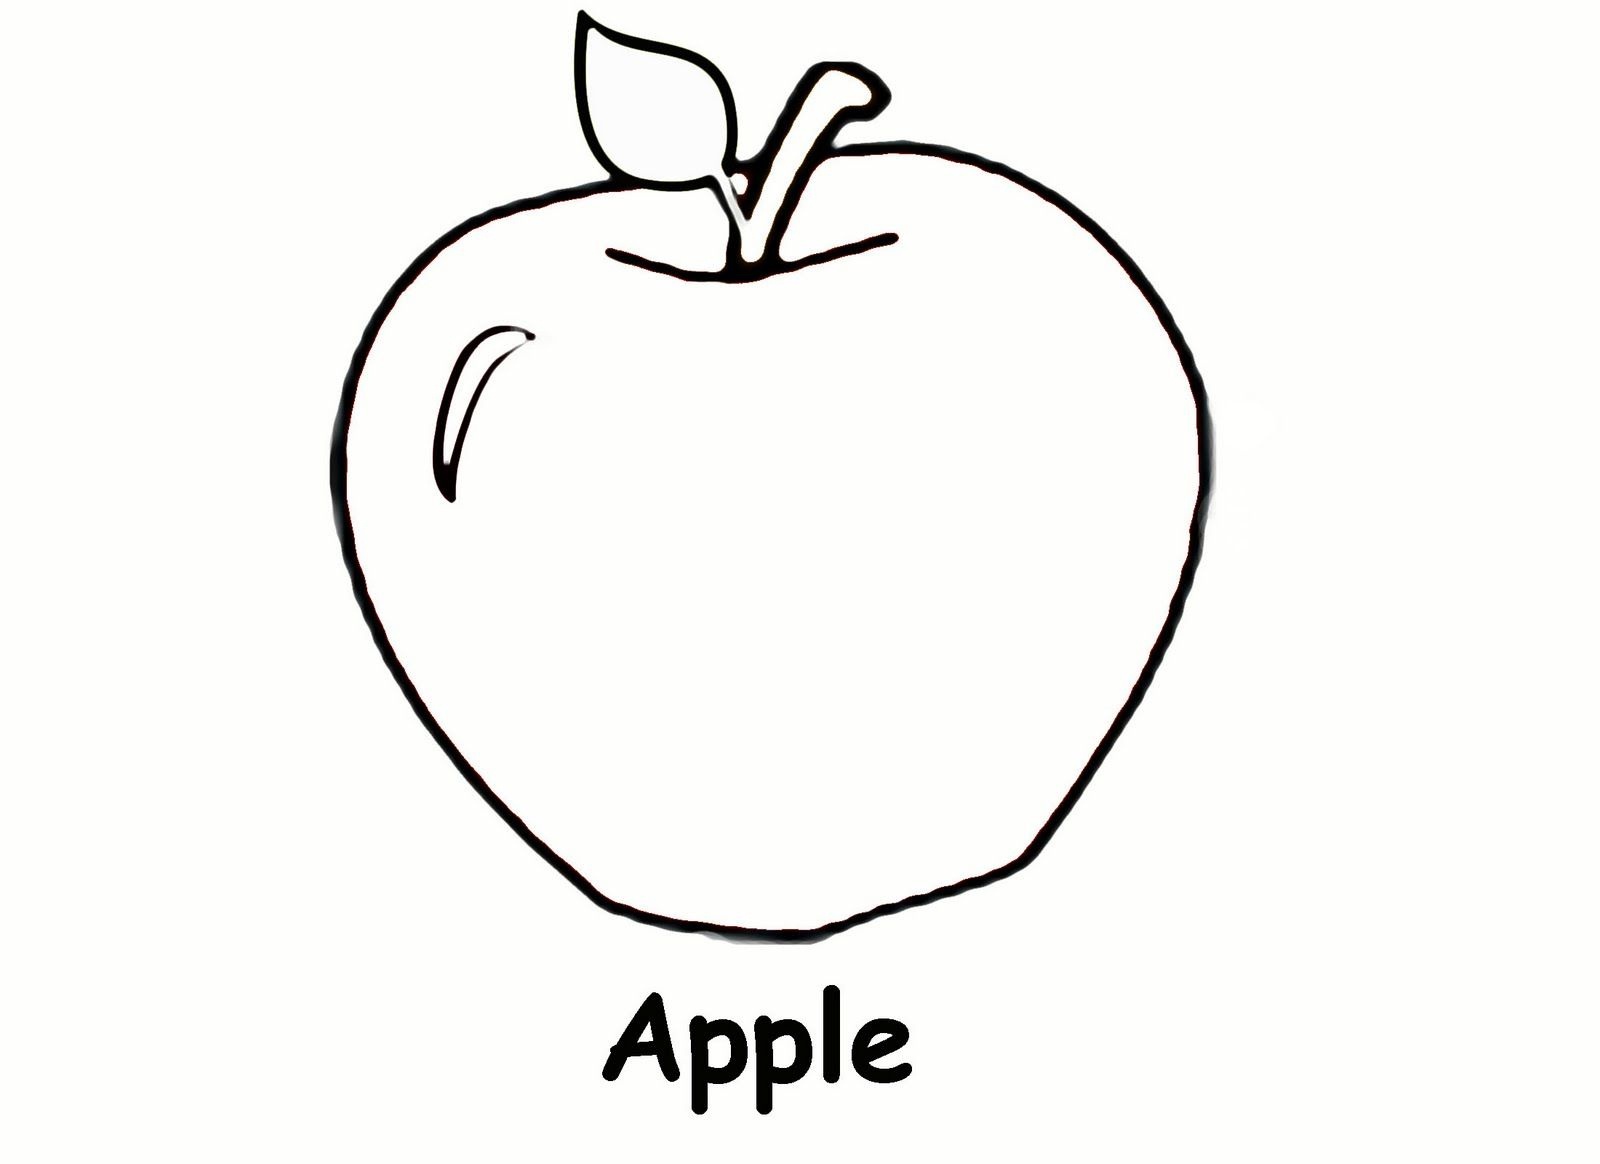 Free Printable Apple Coloring Pages For Kids | Coloring Book Pages - Free Printable Color Sheets For Preschool